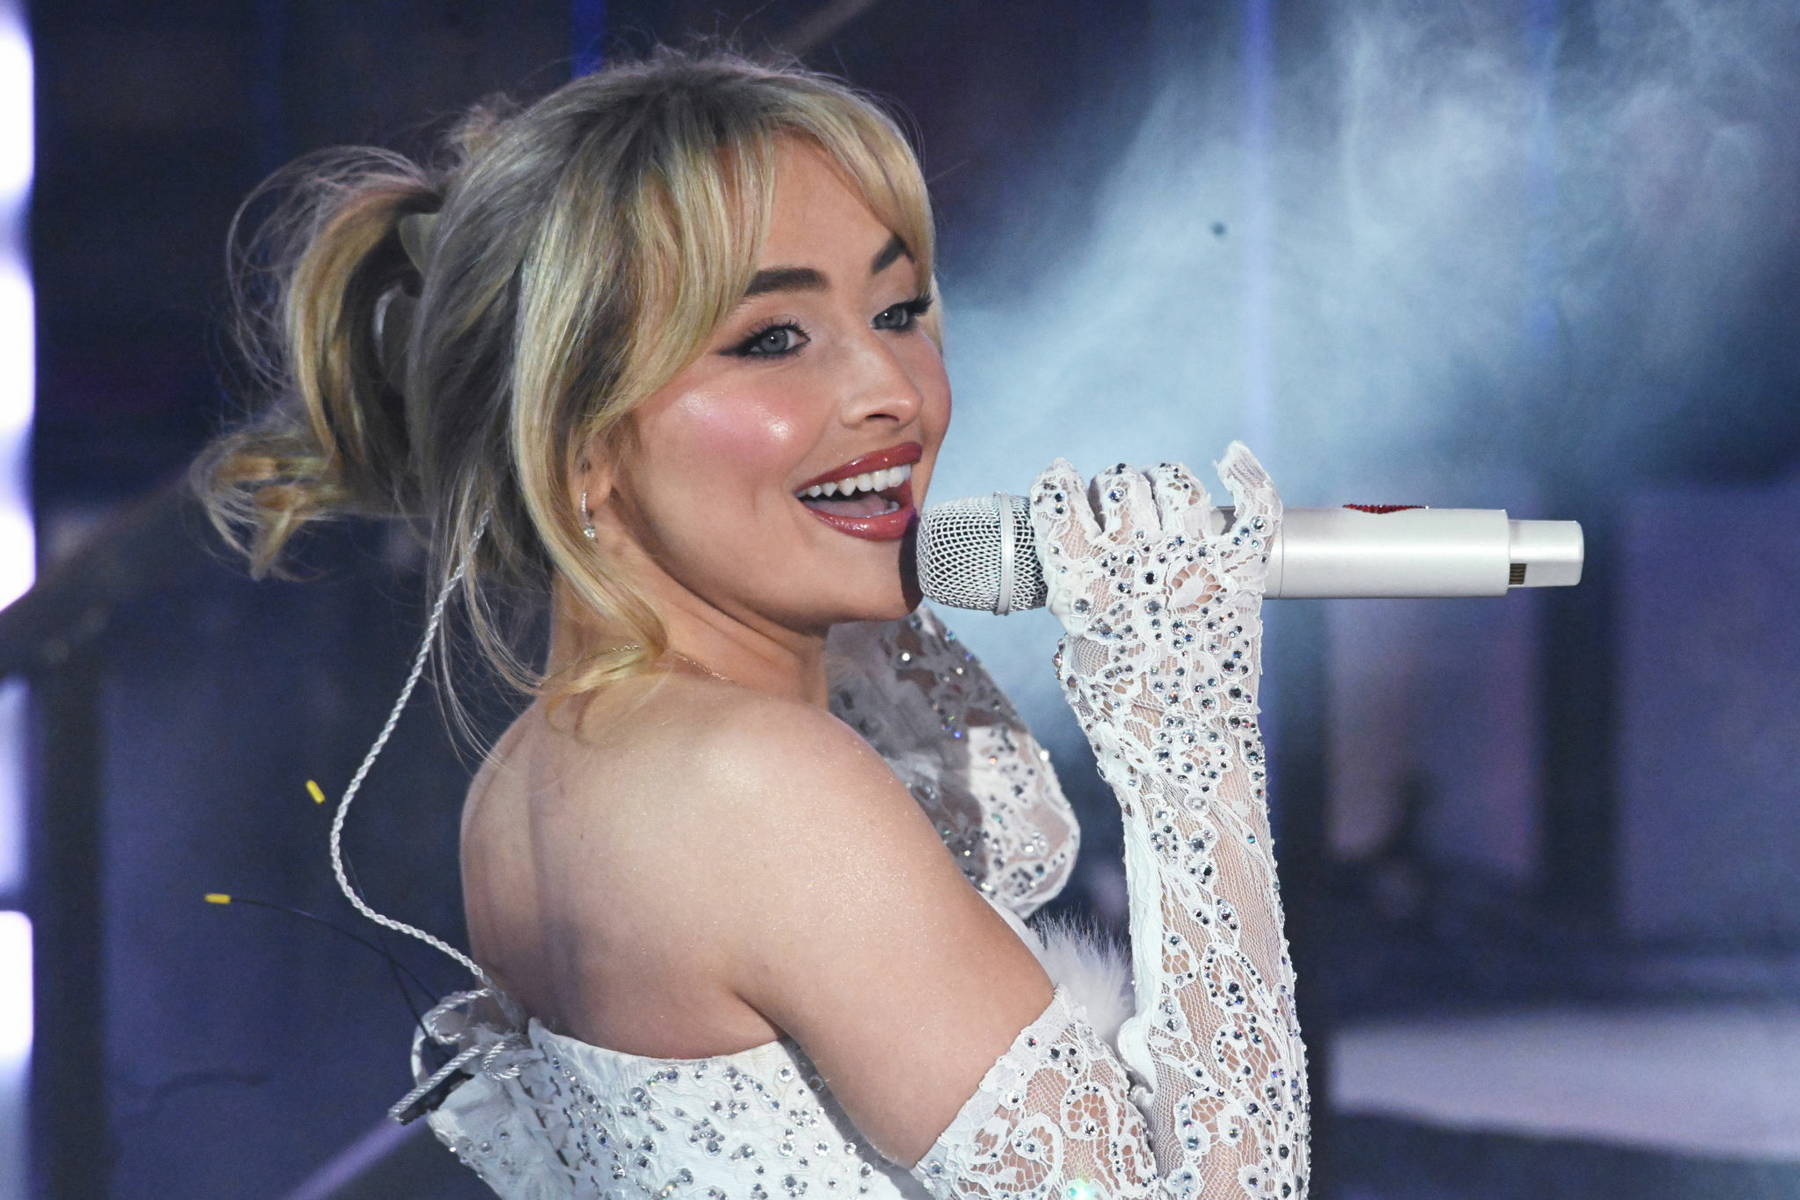 Sabrina Carpenter performing live in concert / (Accredited to CelebsFirst)